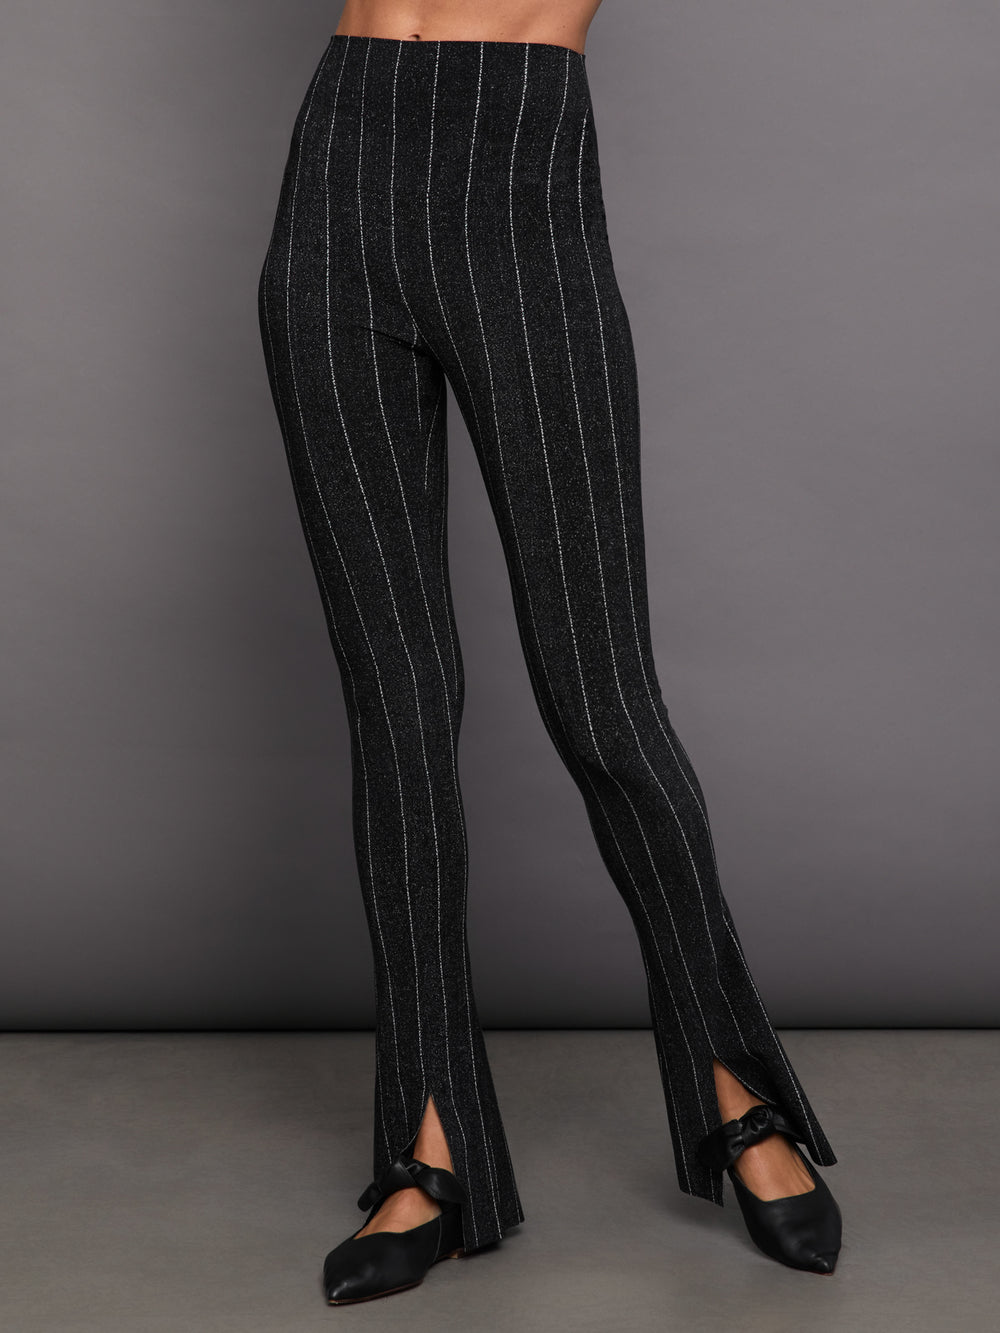 Carbon 38 Black Striped Leggings Size XS - $28 - From Madi